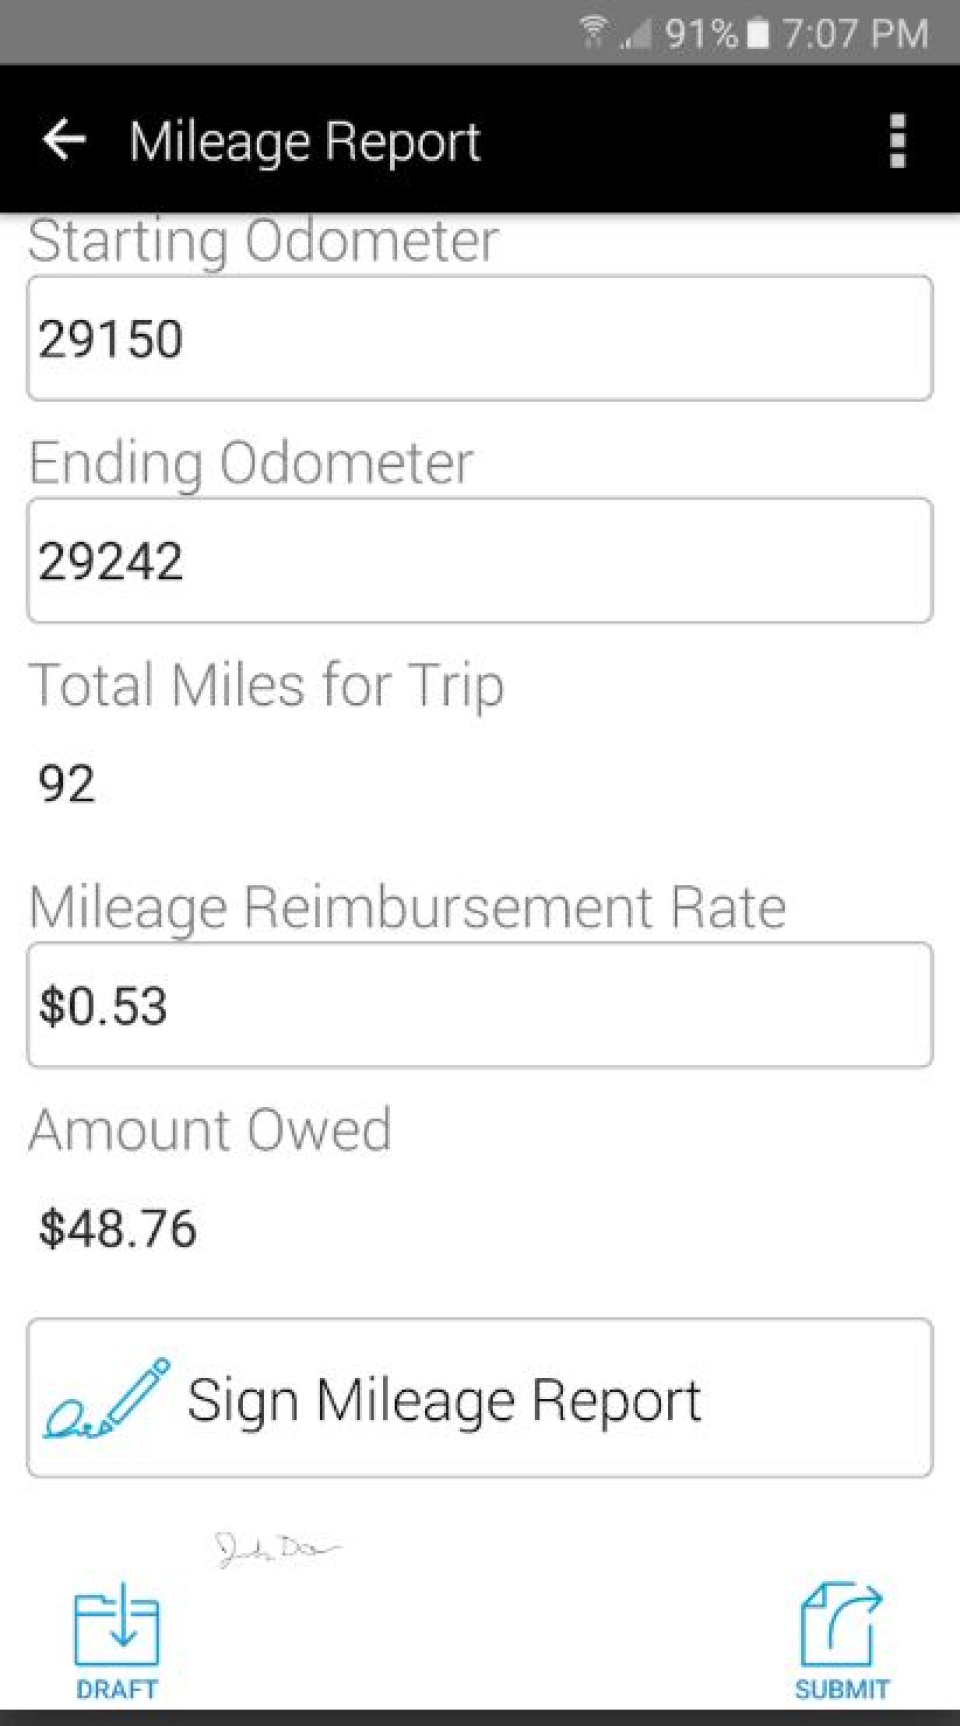 AT&T Workforce Manager mileage report